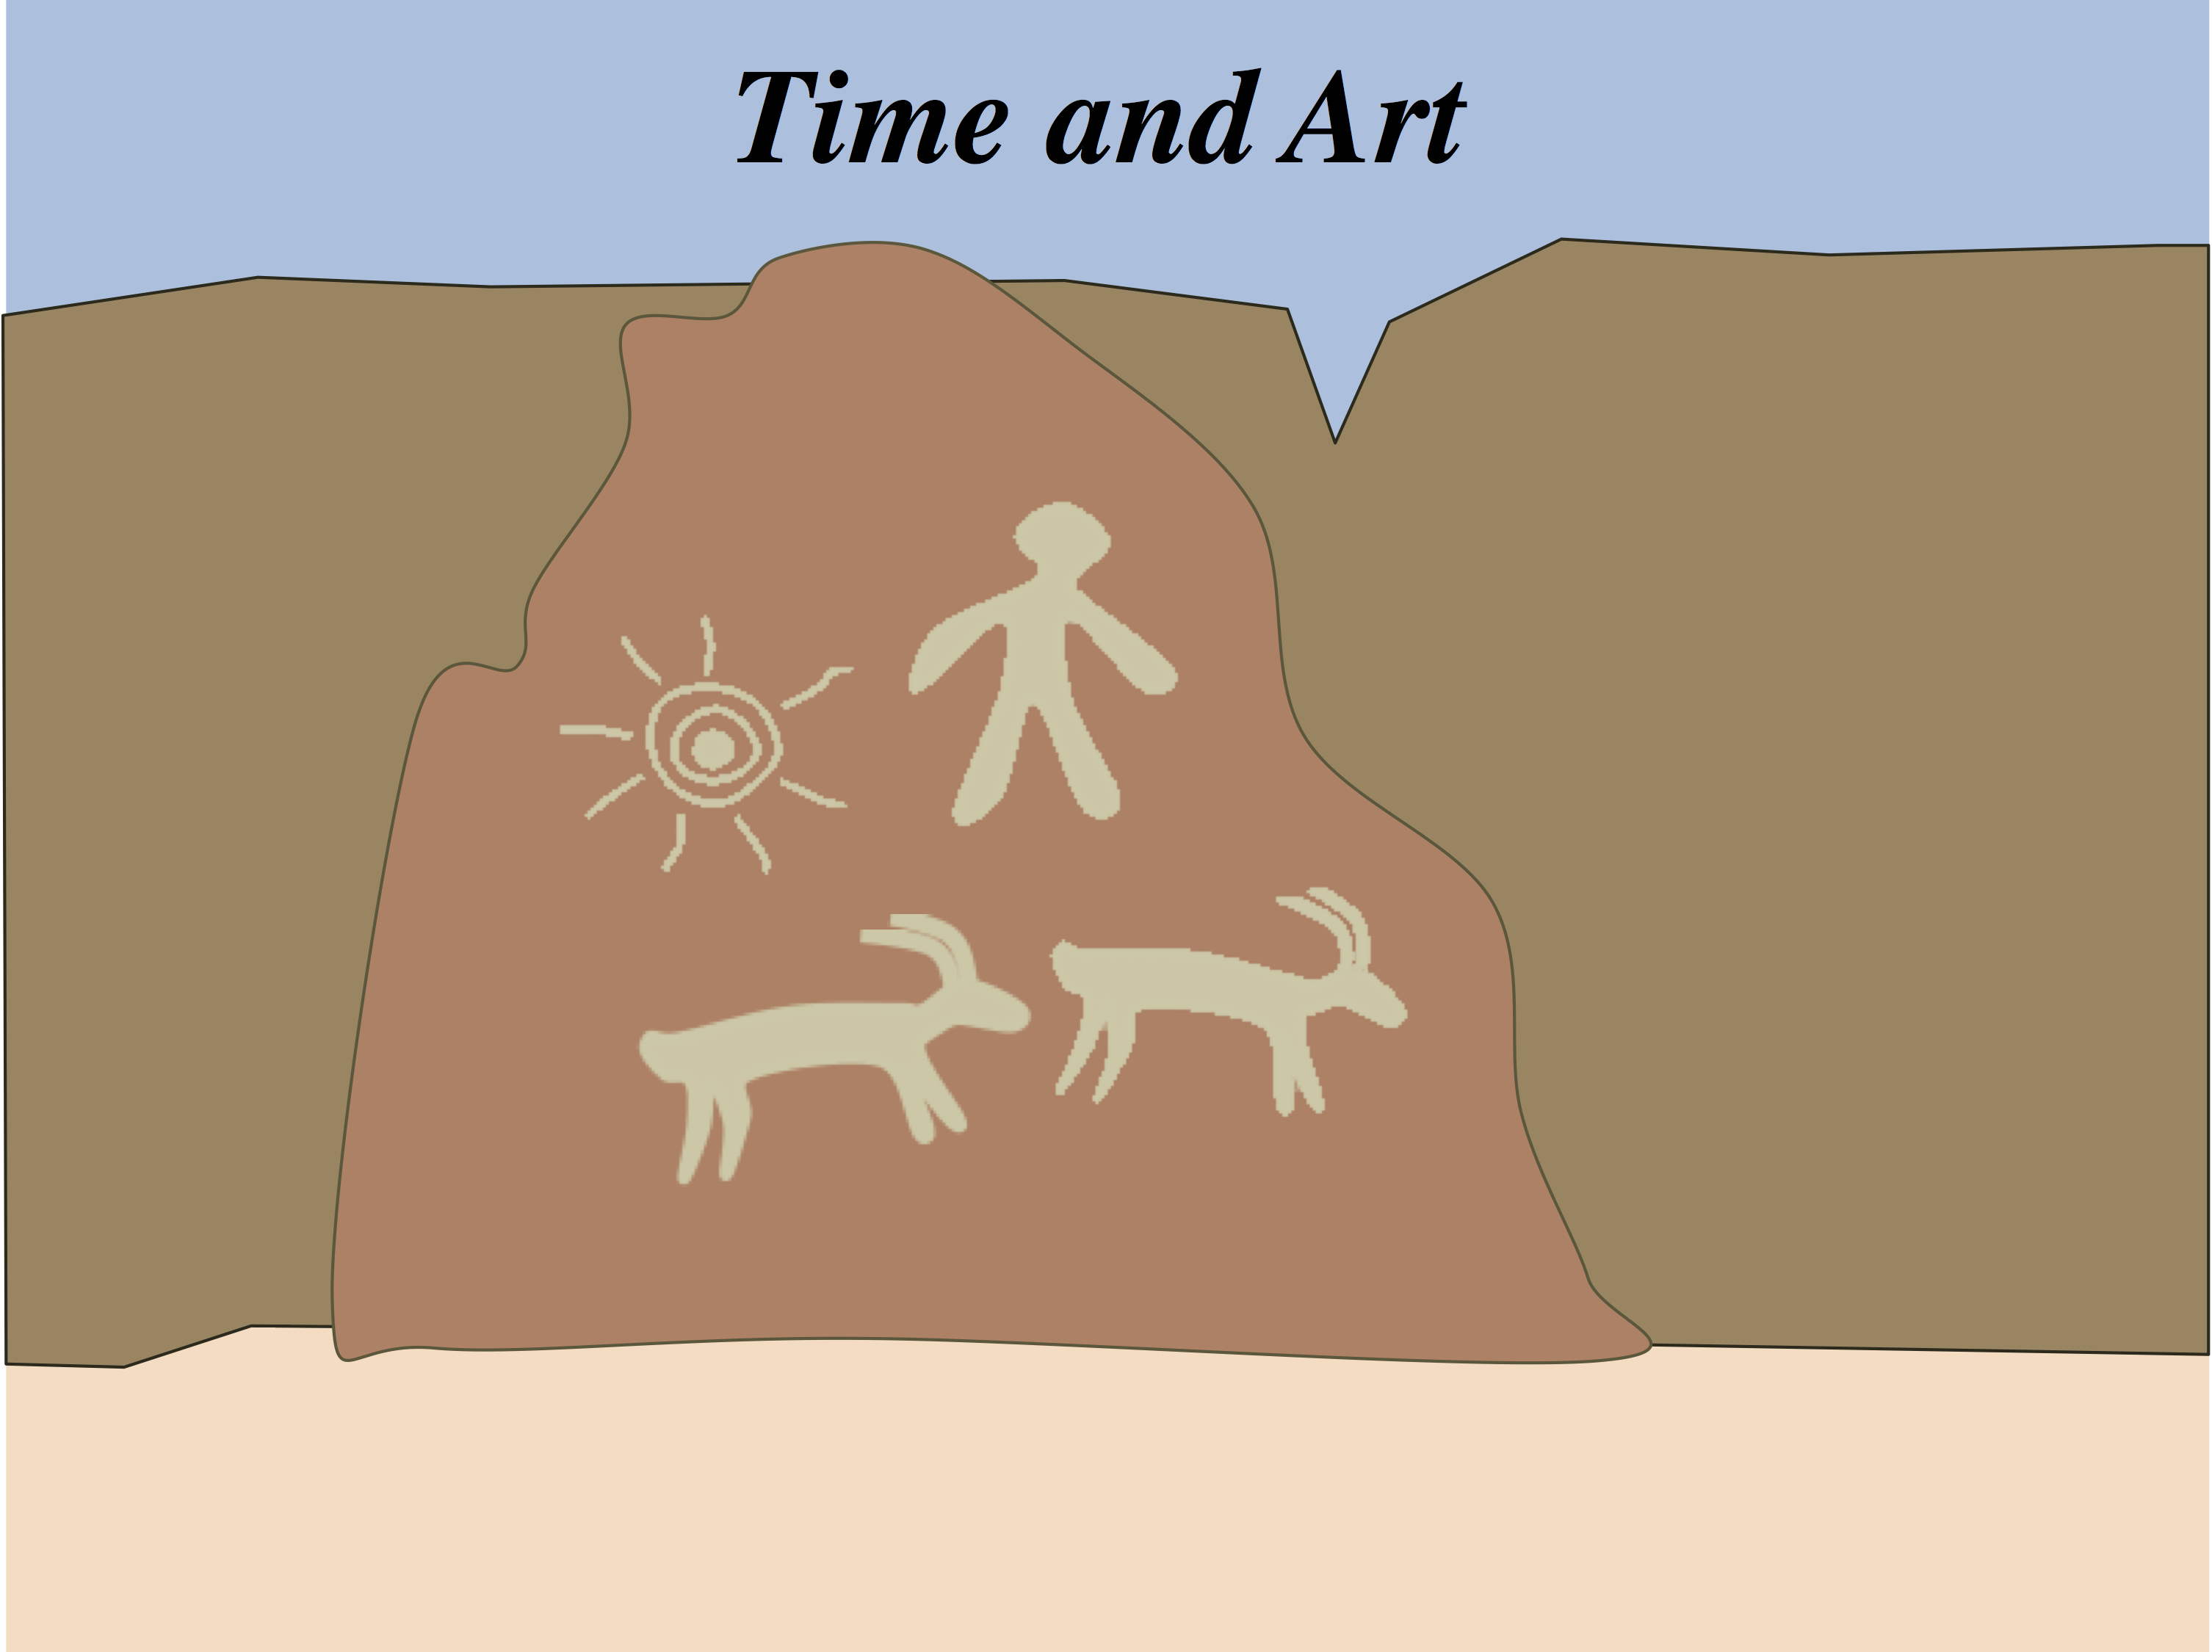 Time and Art